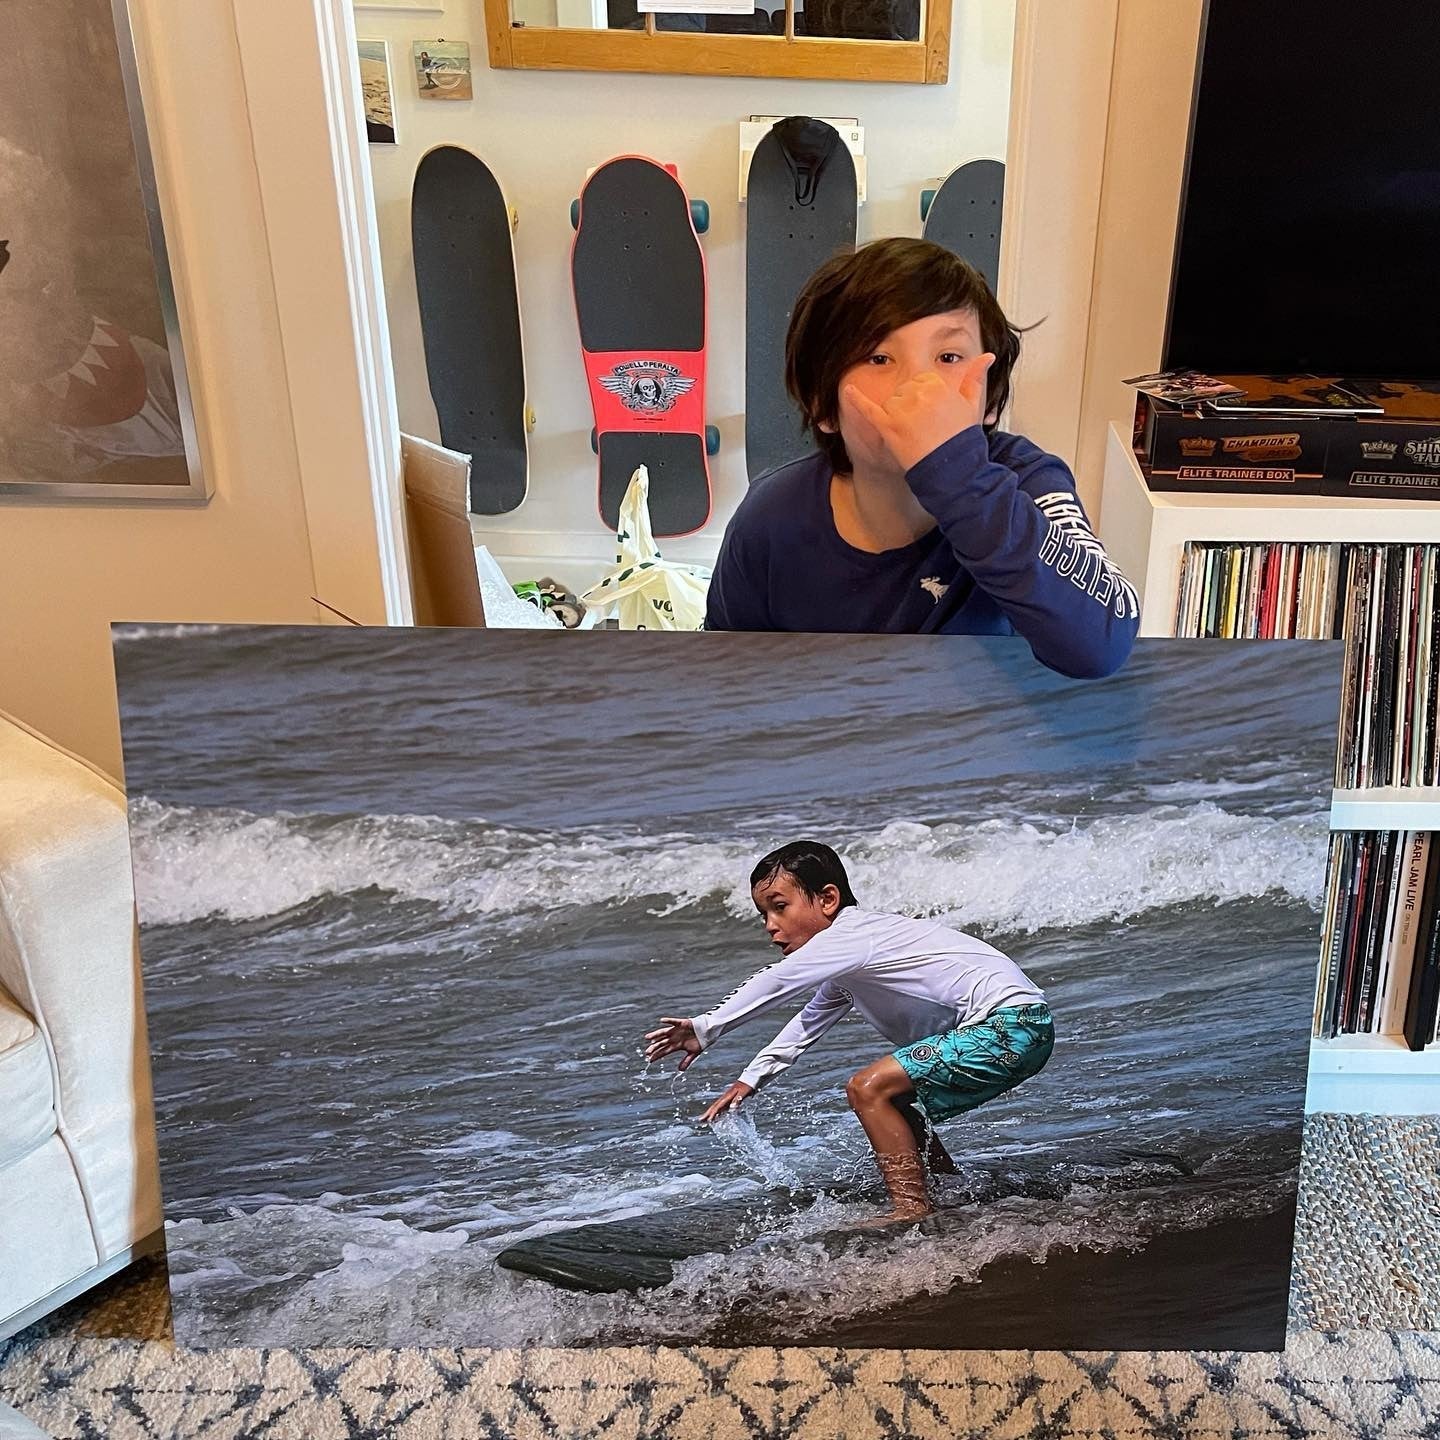 Posterjack Customer Photo Featuring Metal Photo Print of a Person Surfing